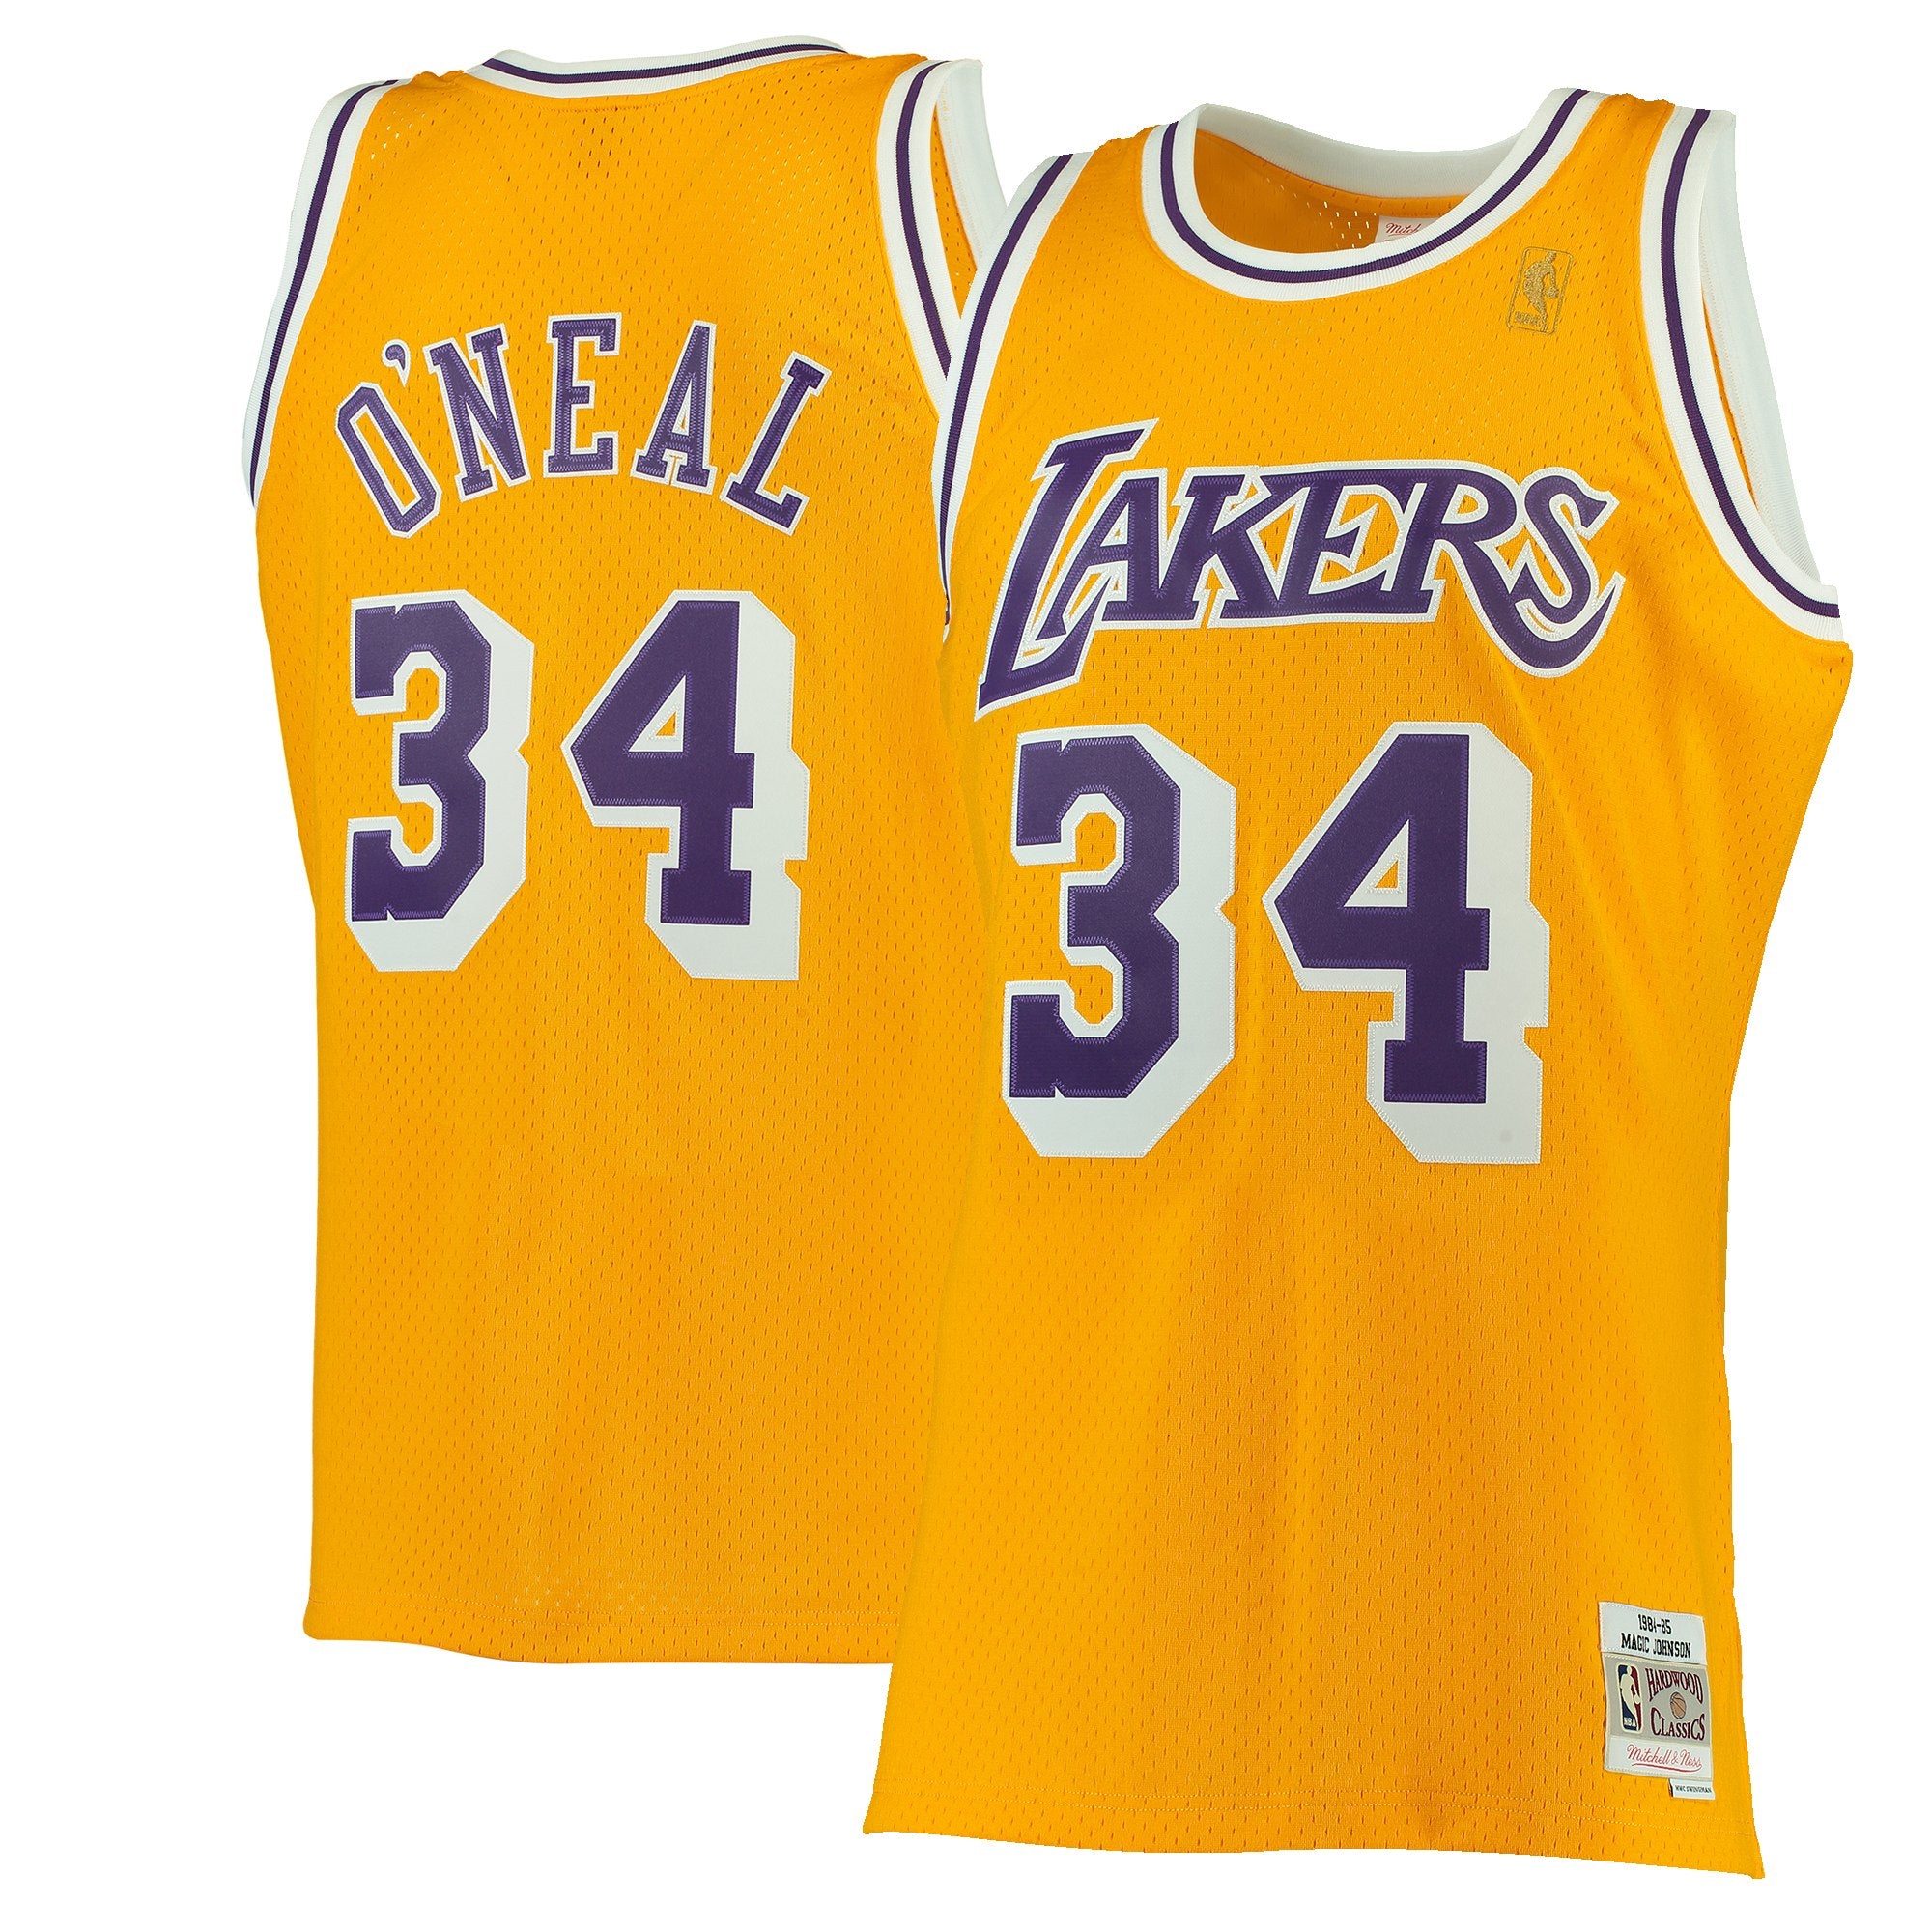 Mitchell & Ness Los Angeles Lakers #34 Shaquille O'Neal purple